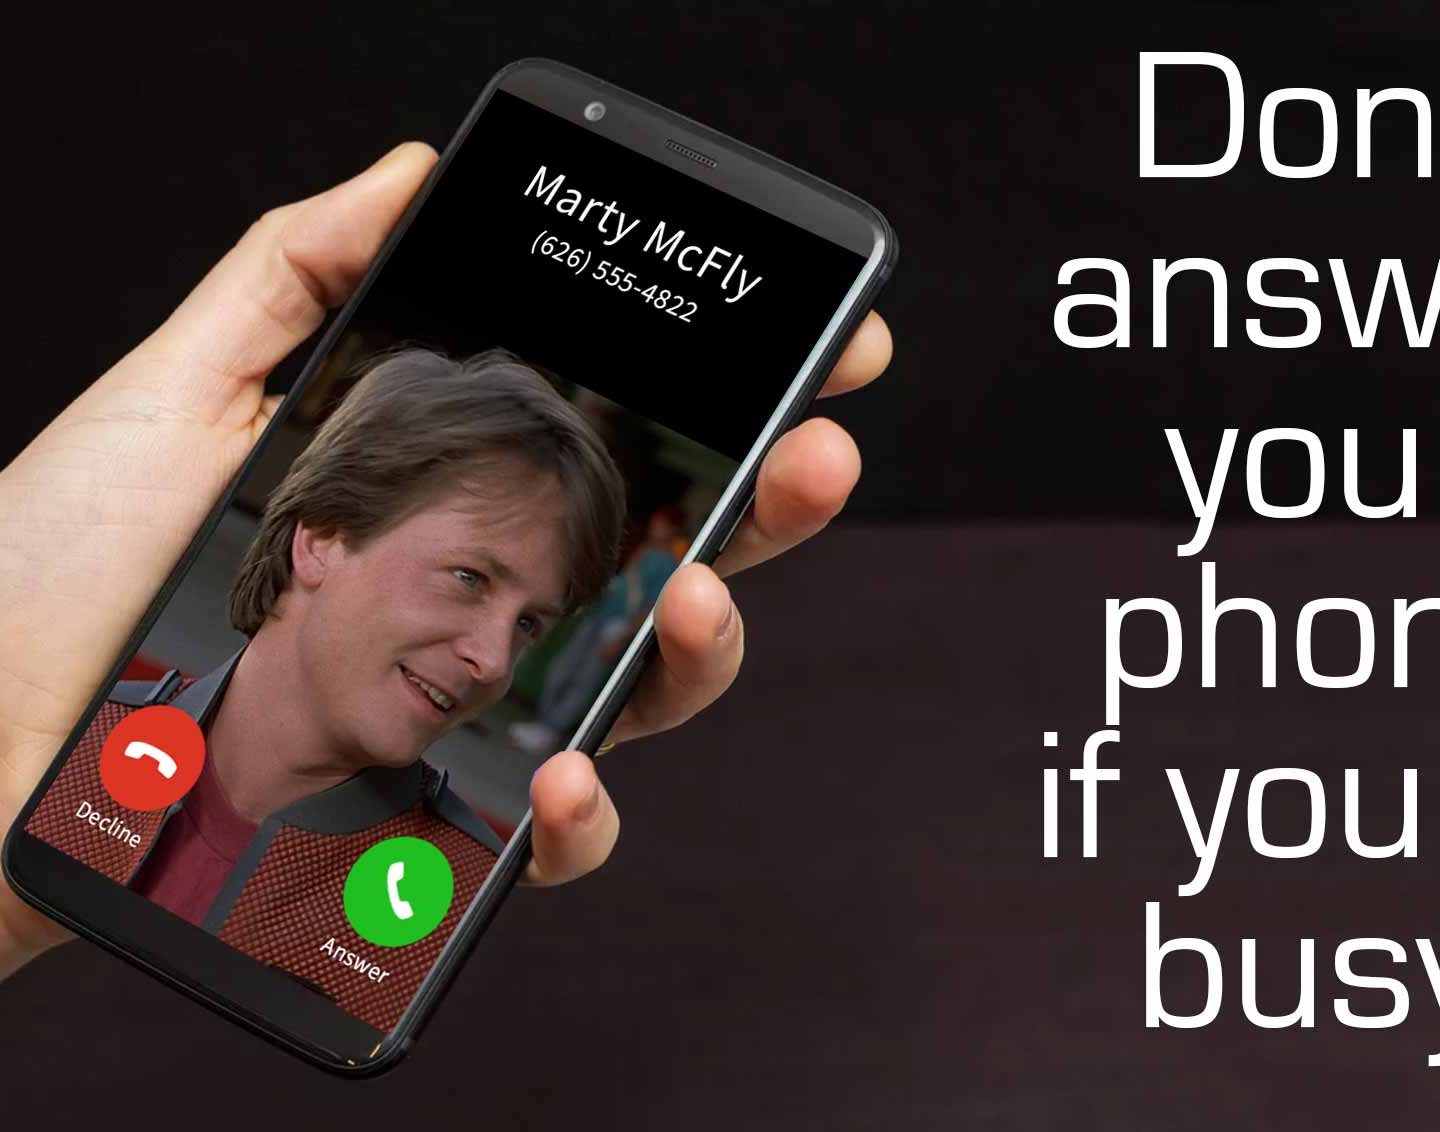 DON’T ANSWER THE PHONE IF YOU’RE BUSY!